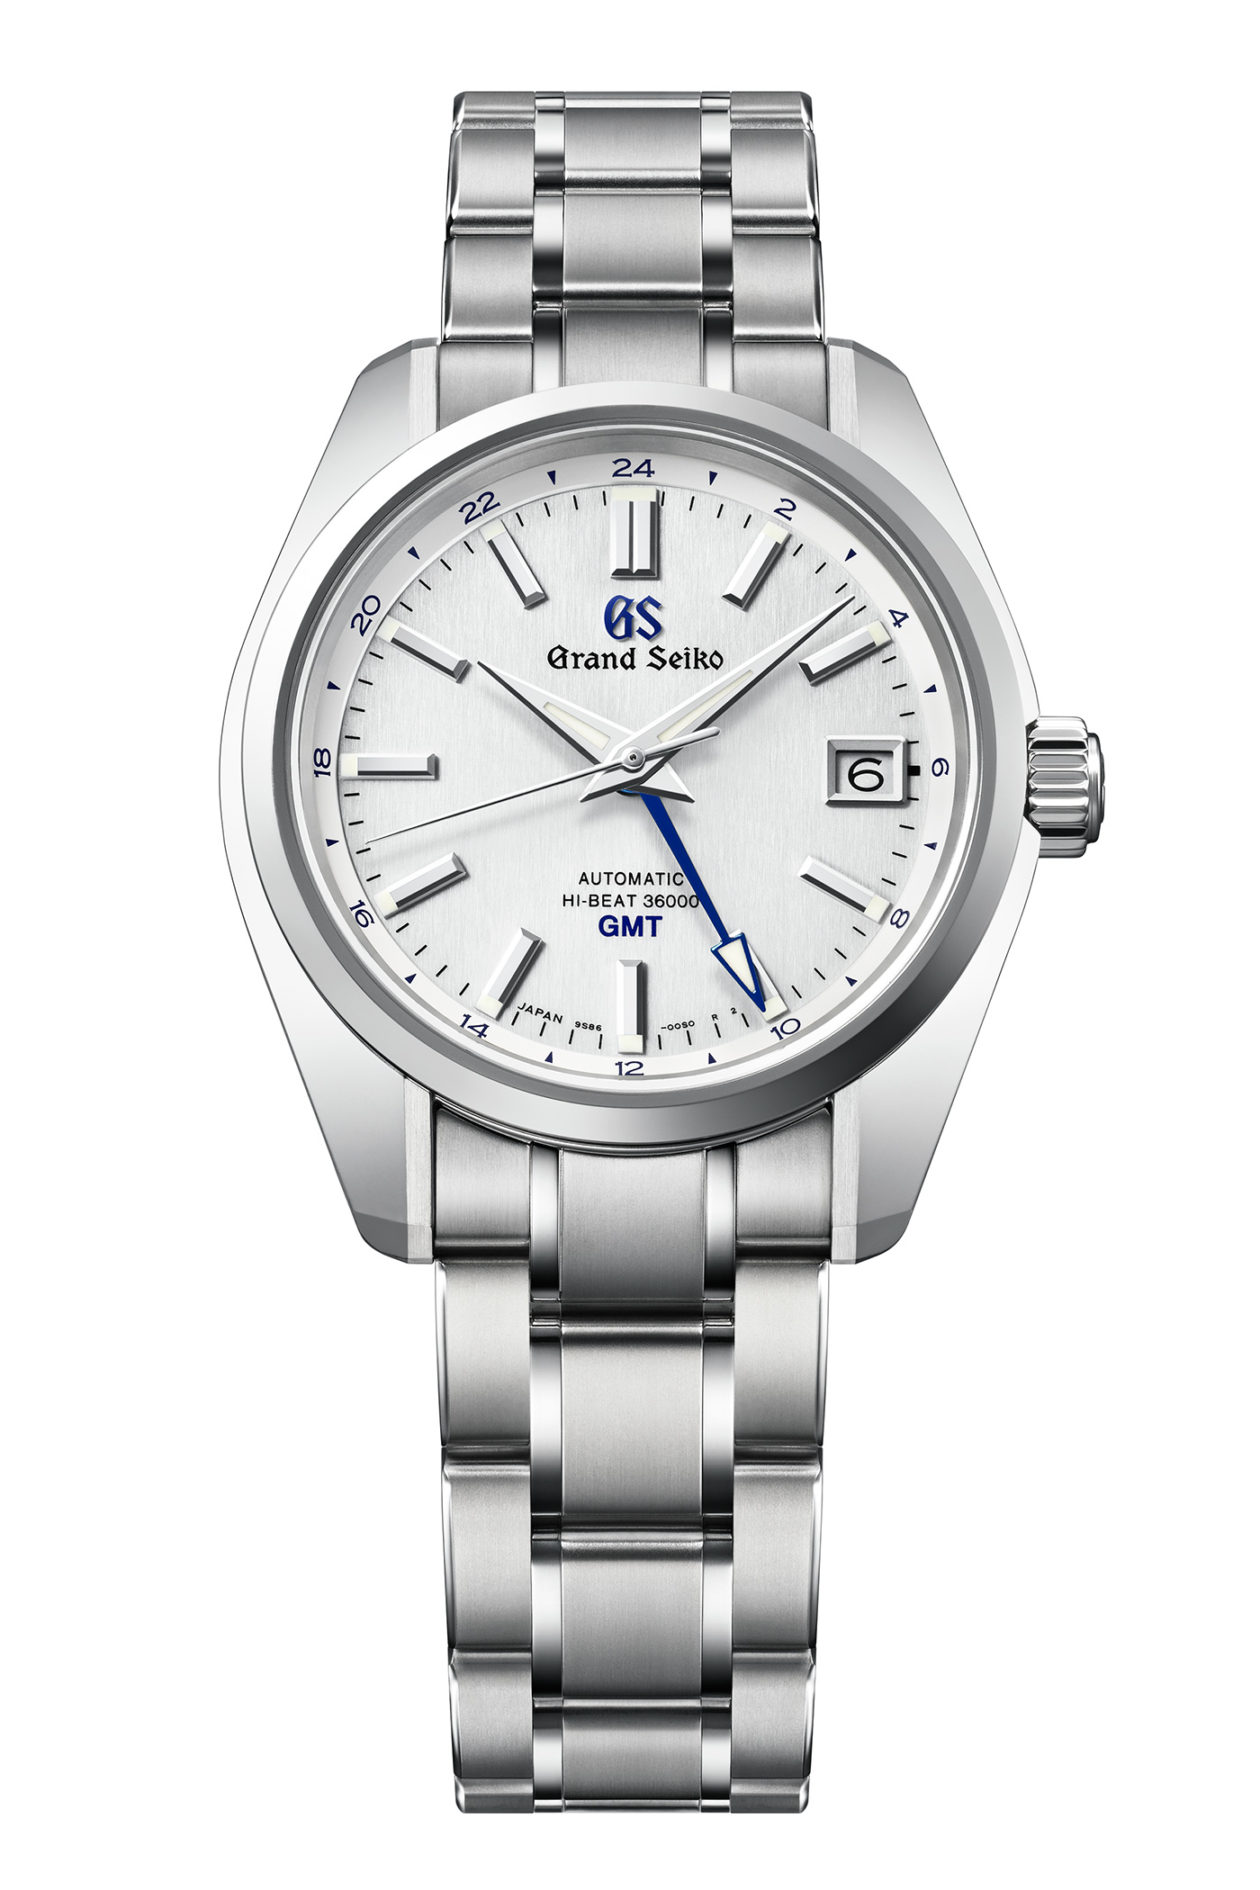 Grand Seiko Heritage Collection Hi-Beat GMT 44GS 55th Anniversary